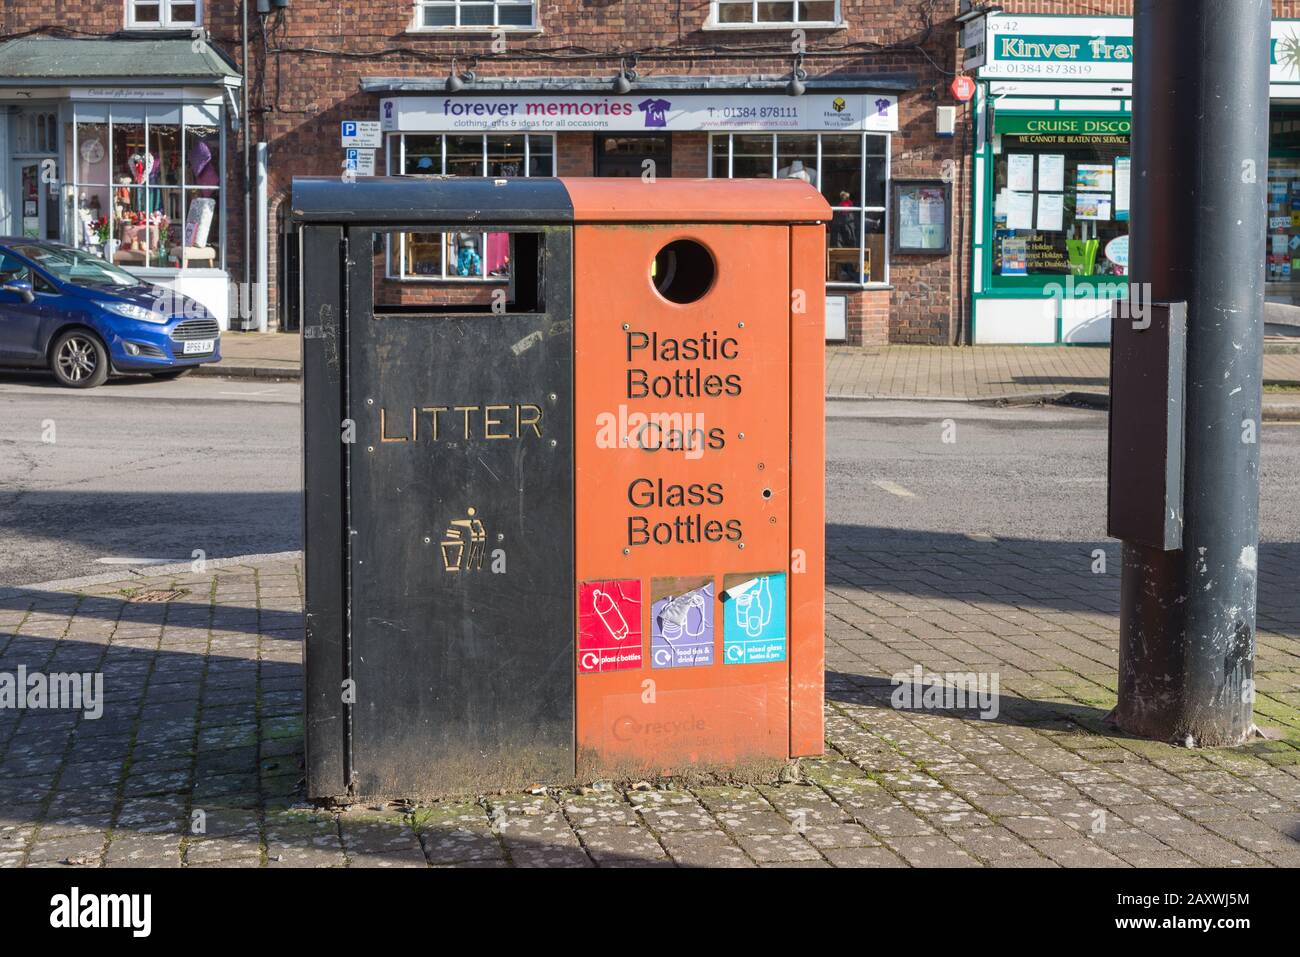 Adjacent litter and recycling bins in the pavement in Kinver, South Staffordshire Stock Photo